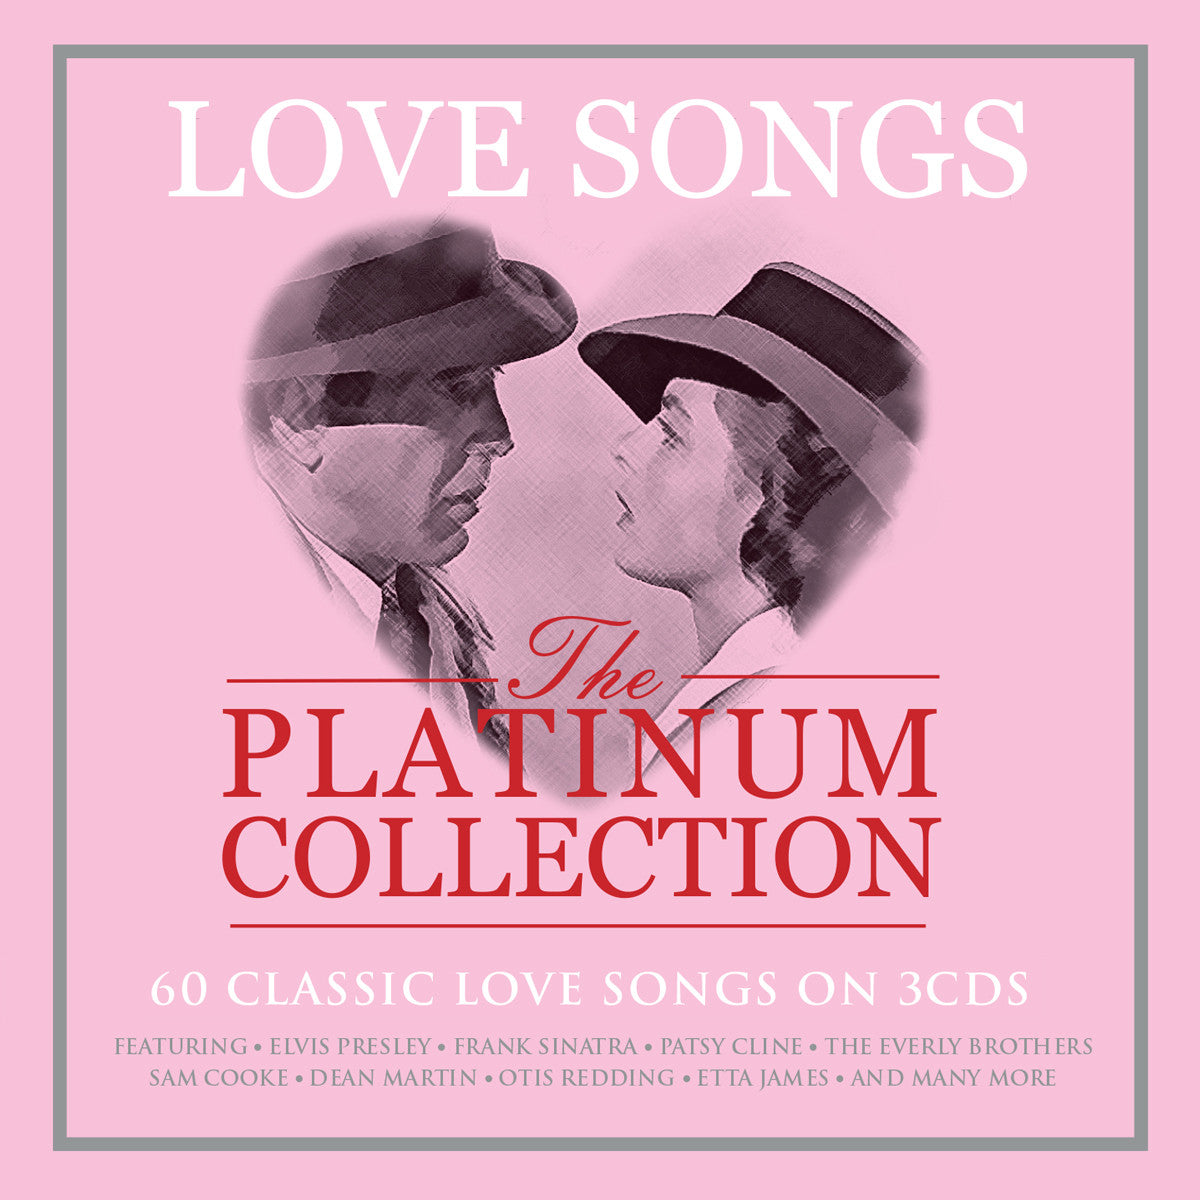 LOVE SONGS - THE PLATINUM COLLECTION (3 CDs)